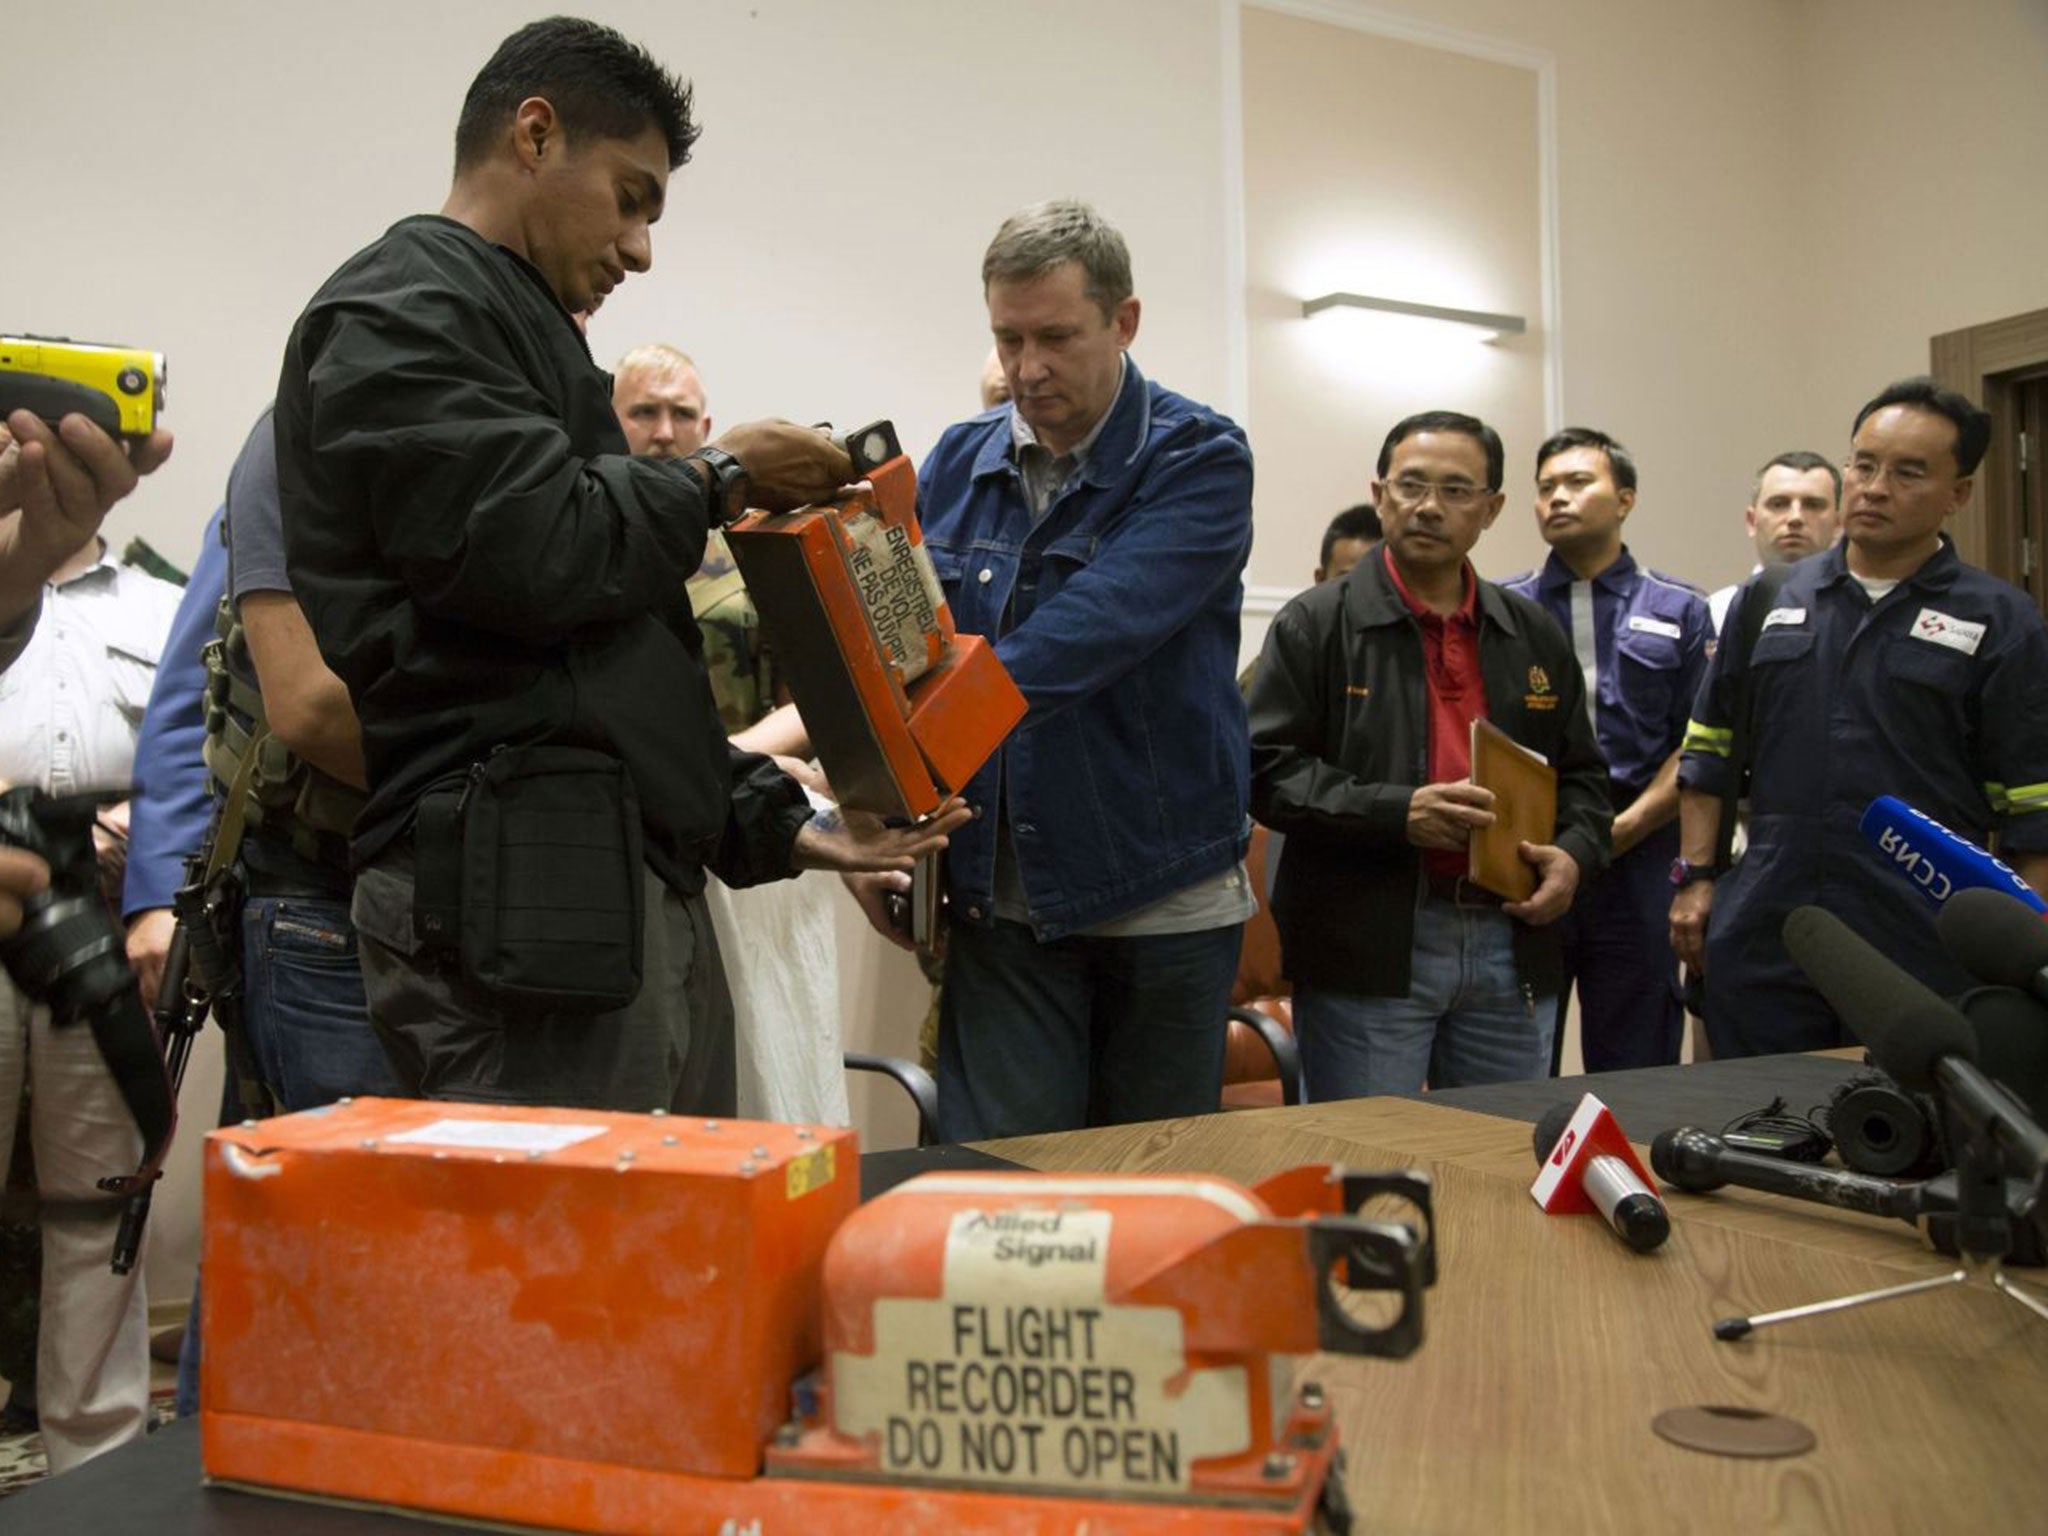 A Donetsk People's Republic official, right, hands over a flight recorder to a Malaysian investigator